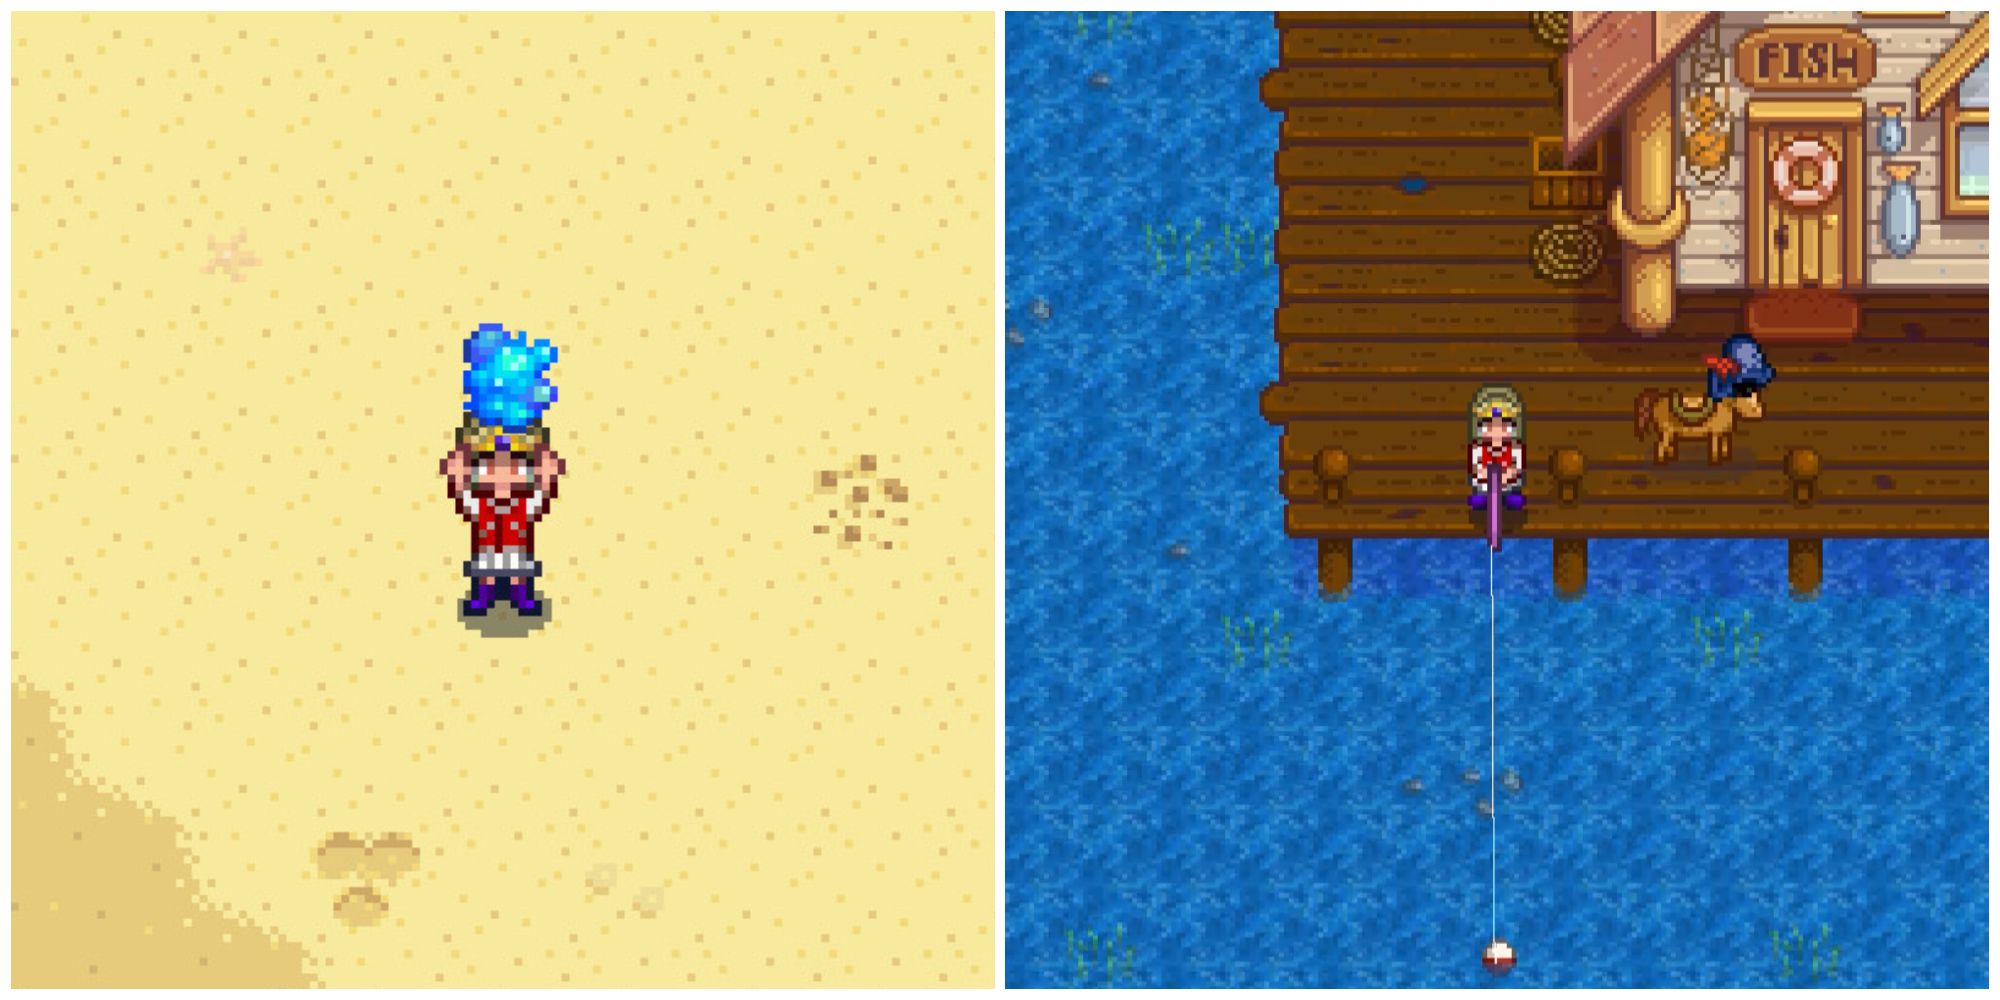 Split image of a character holding a sea jelly and a character fishing in Stardew Valley